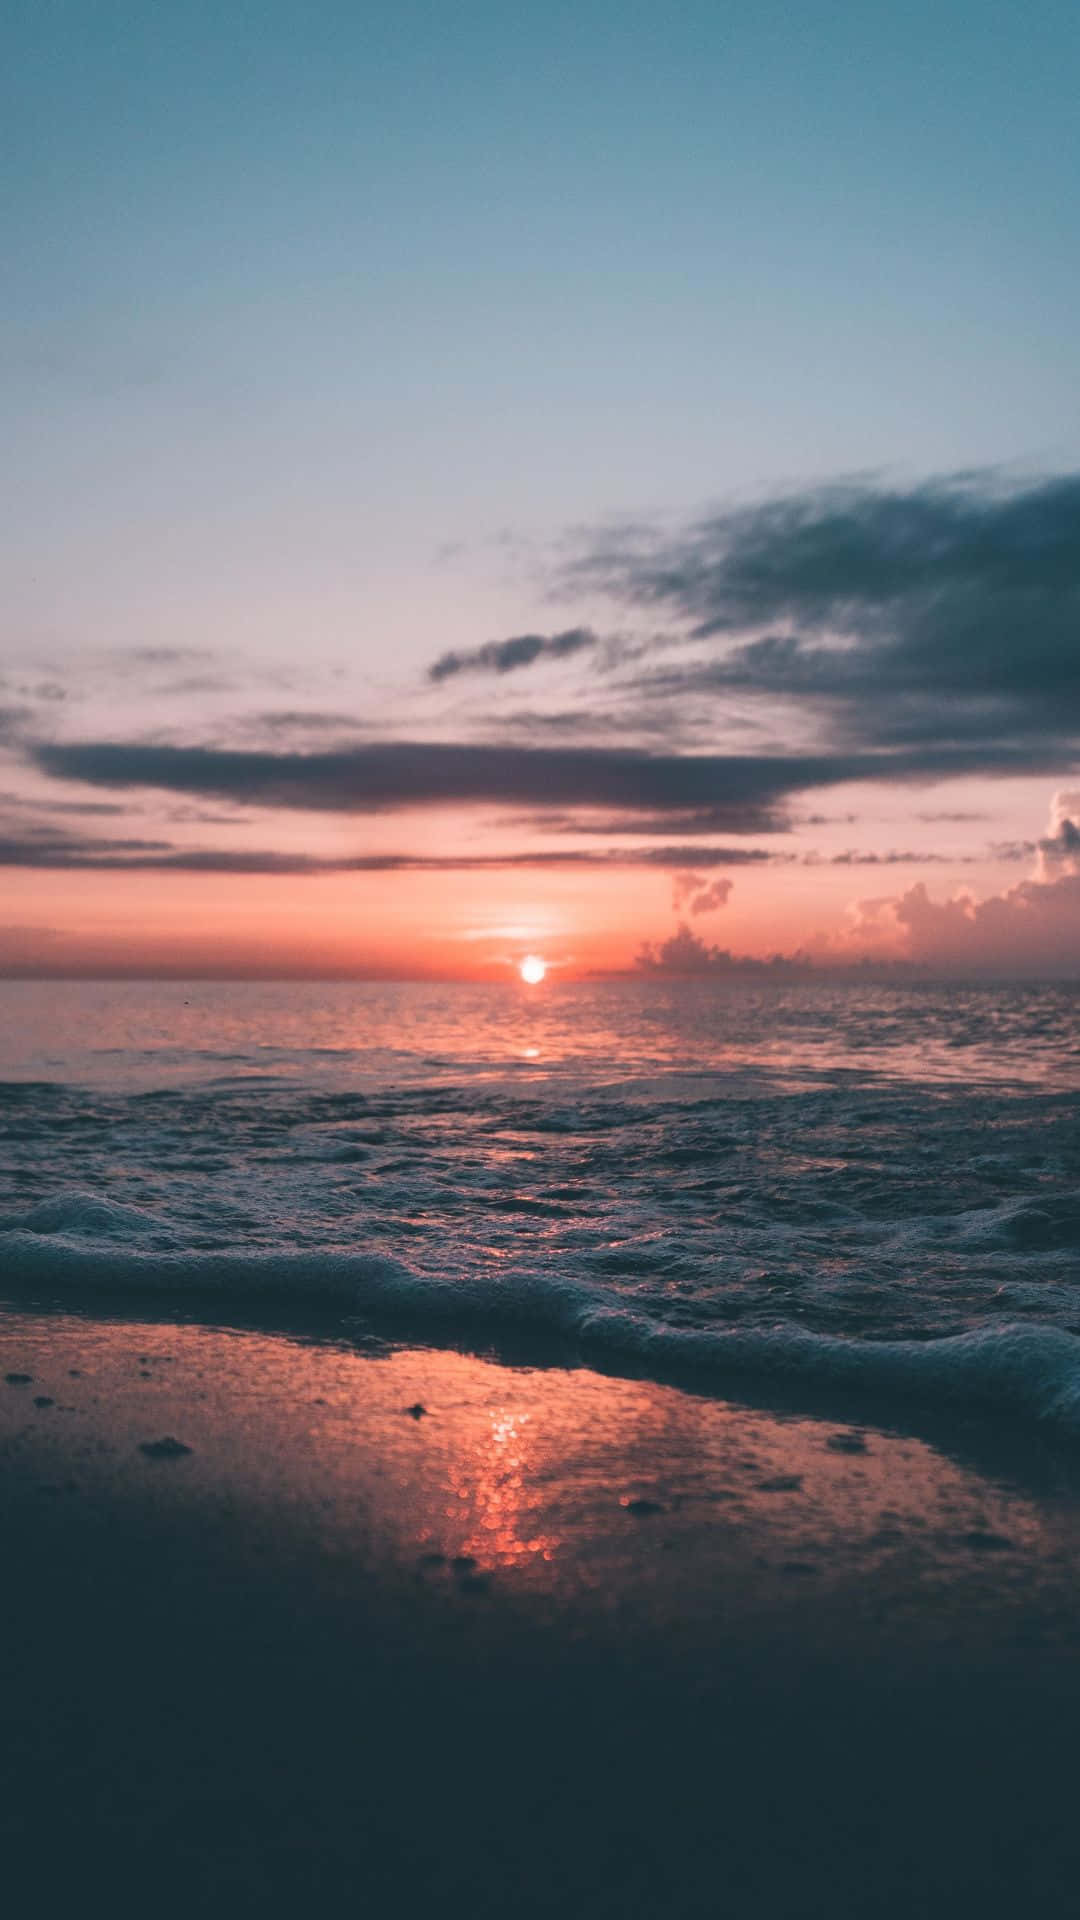 Let the beauty of a beach sunset take you away